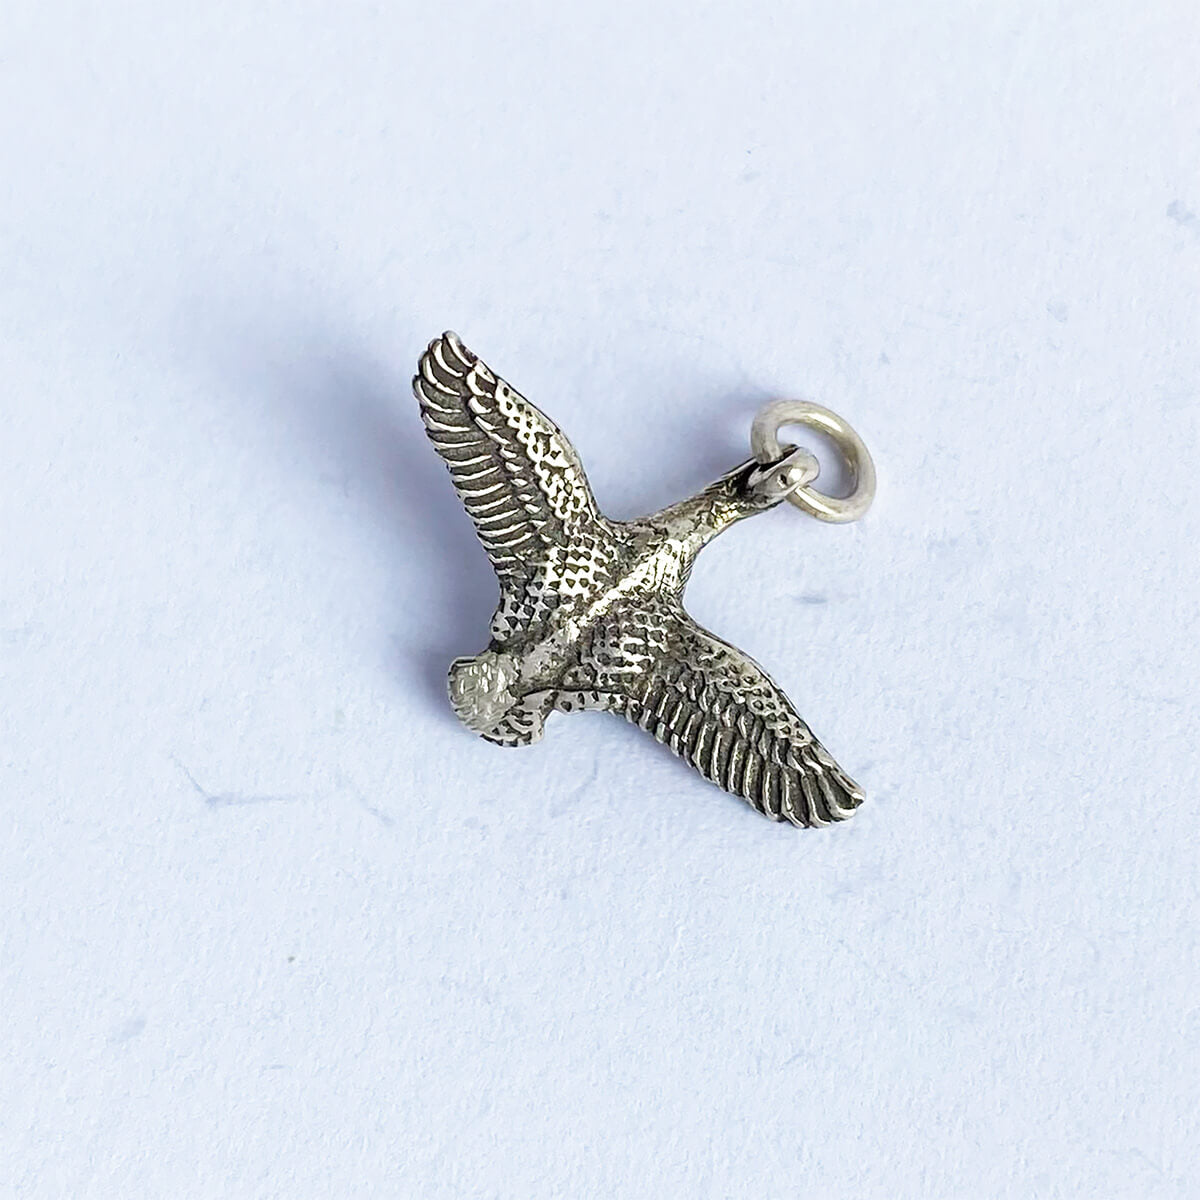 3 Dimensional silver flying duck charm